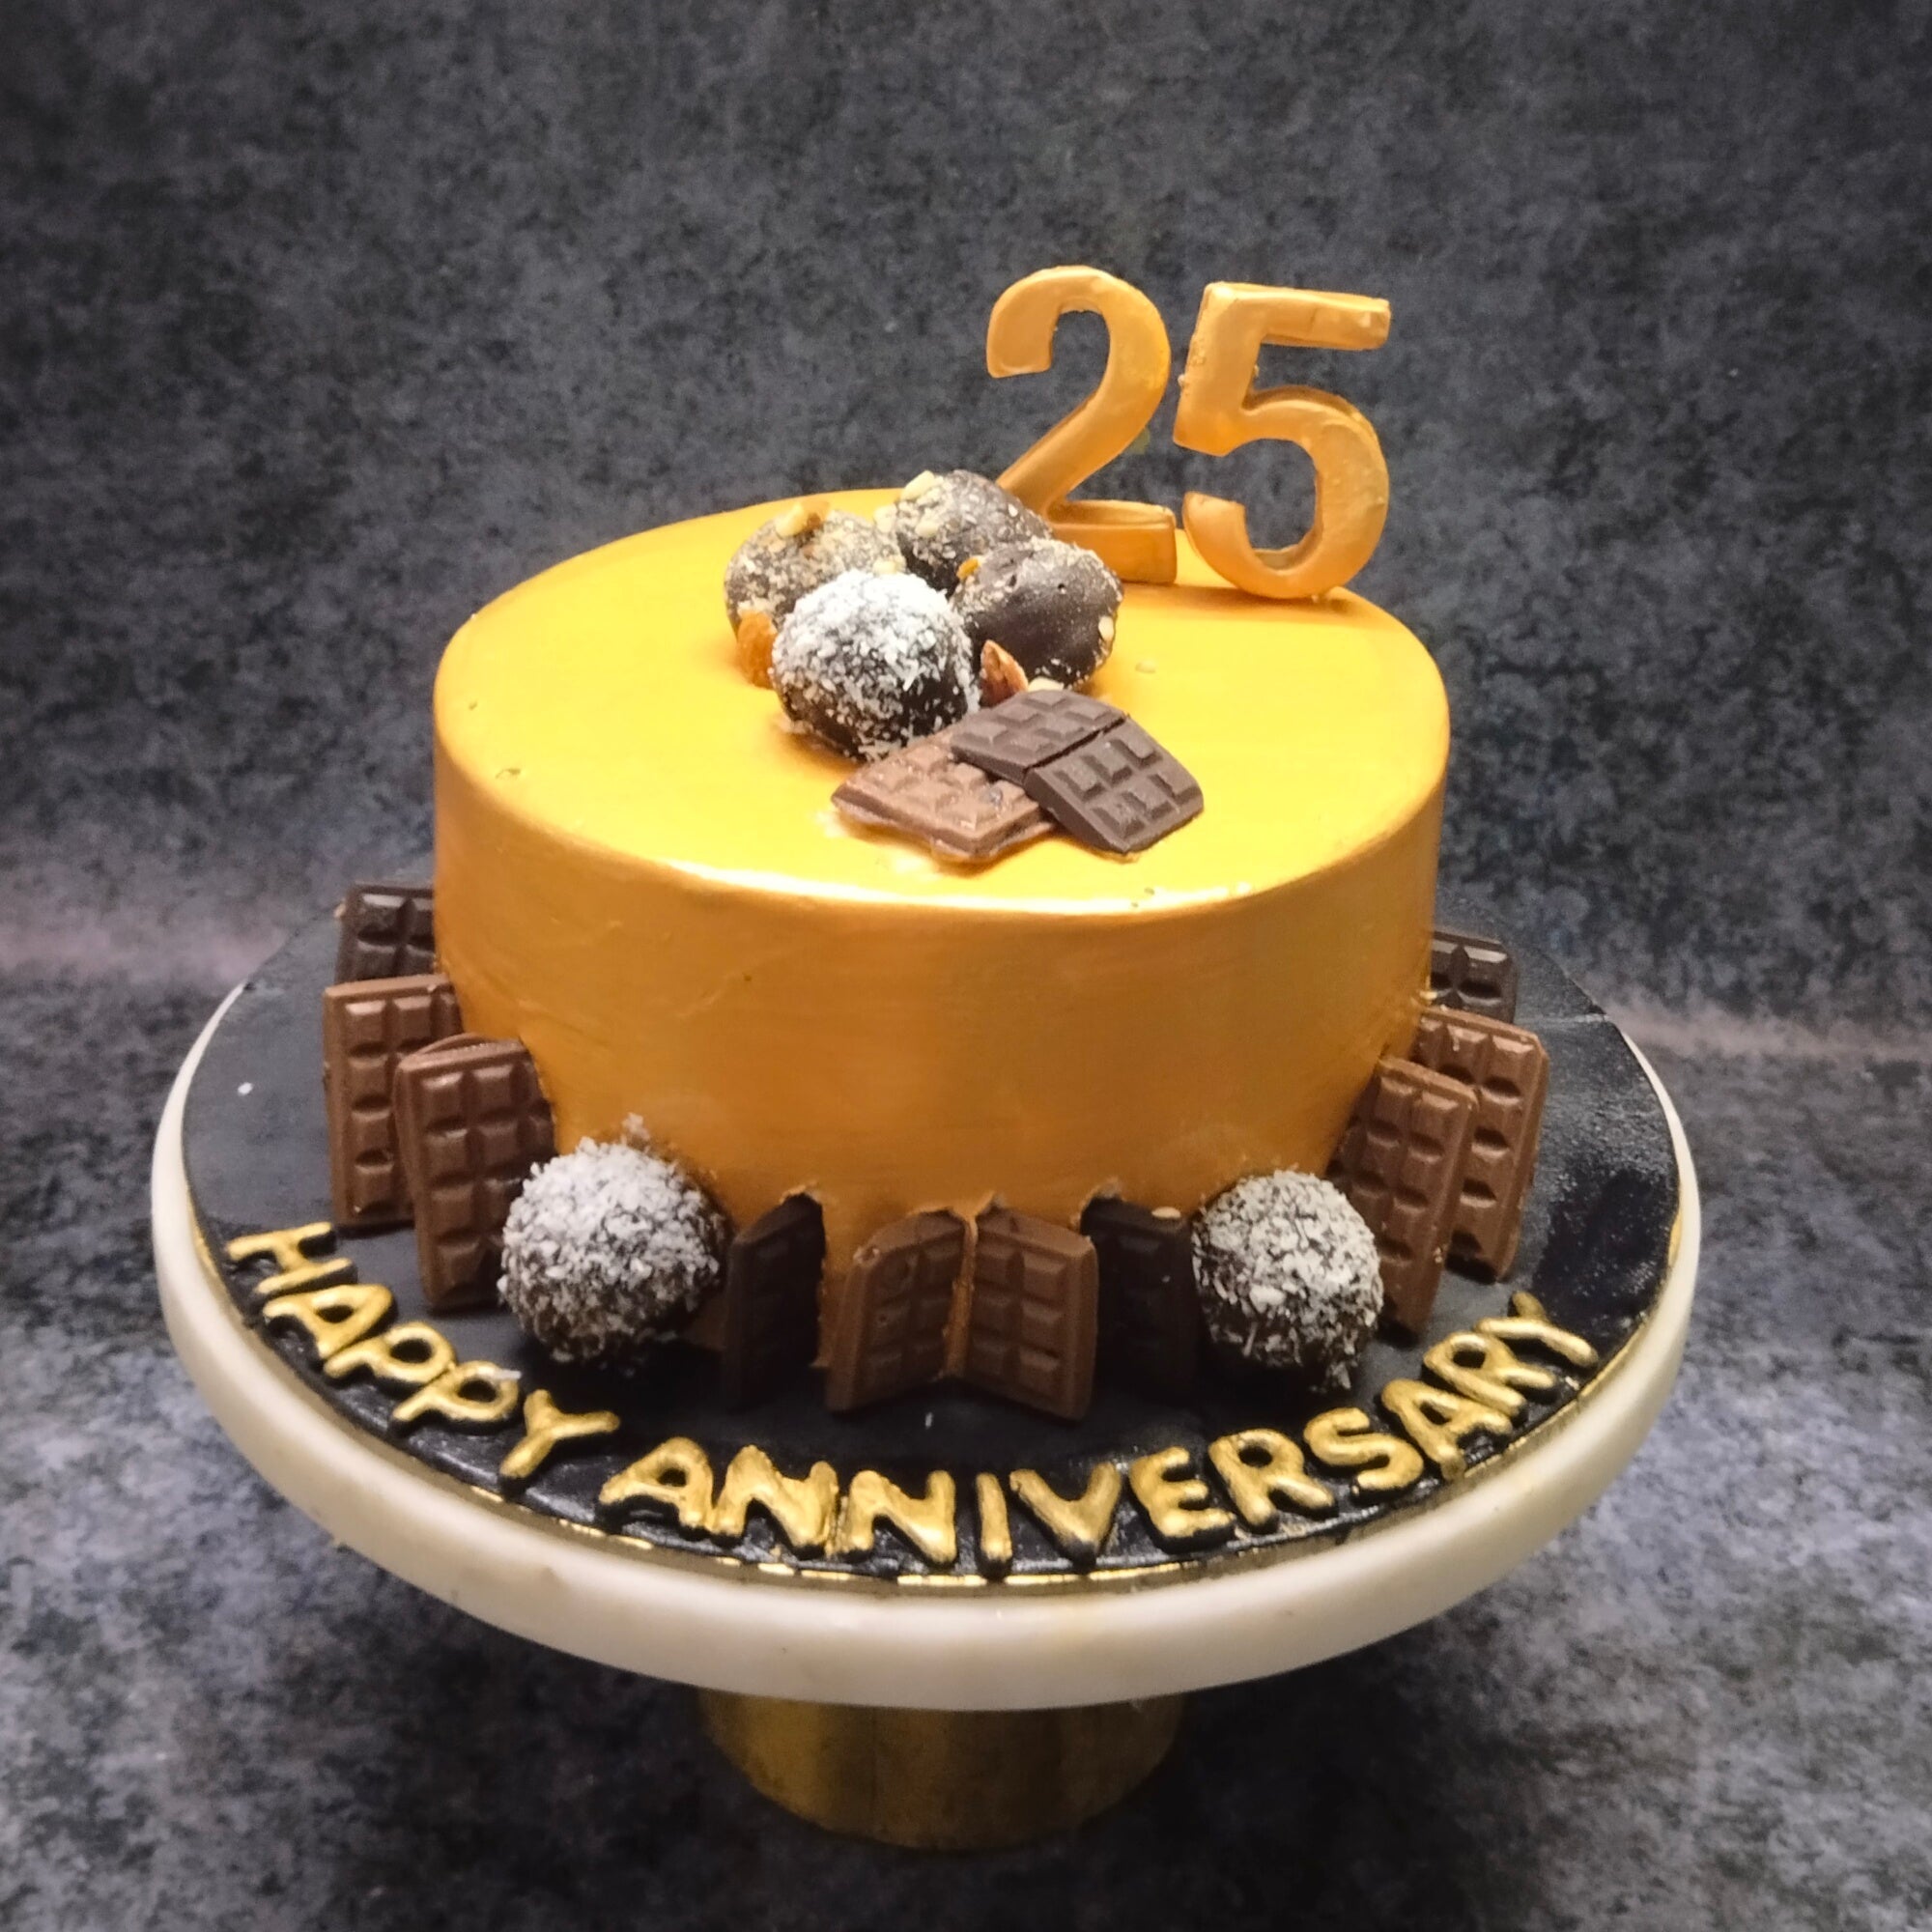 Anniversary Theme Cake in Naktala - Cakes and Bakes Stories